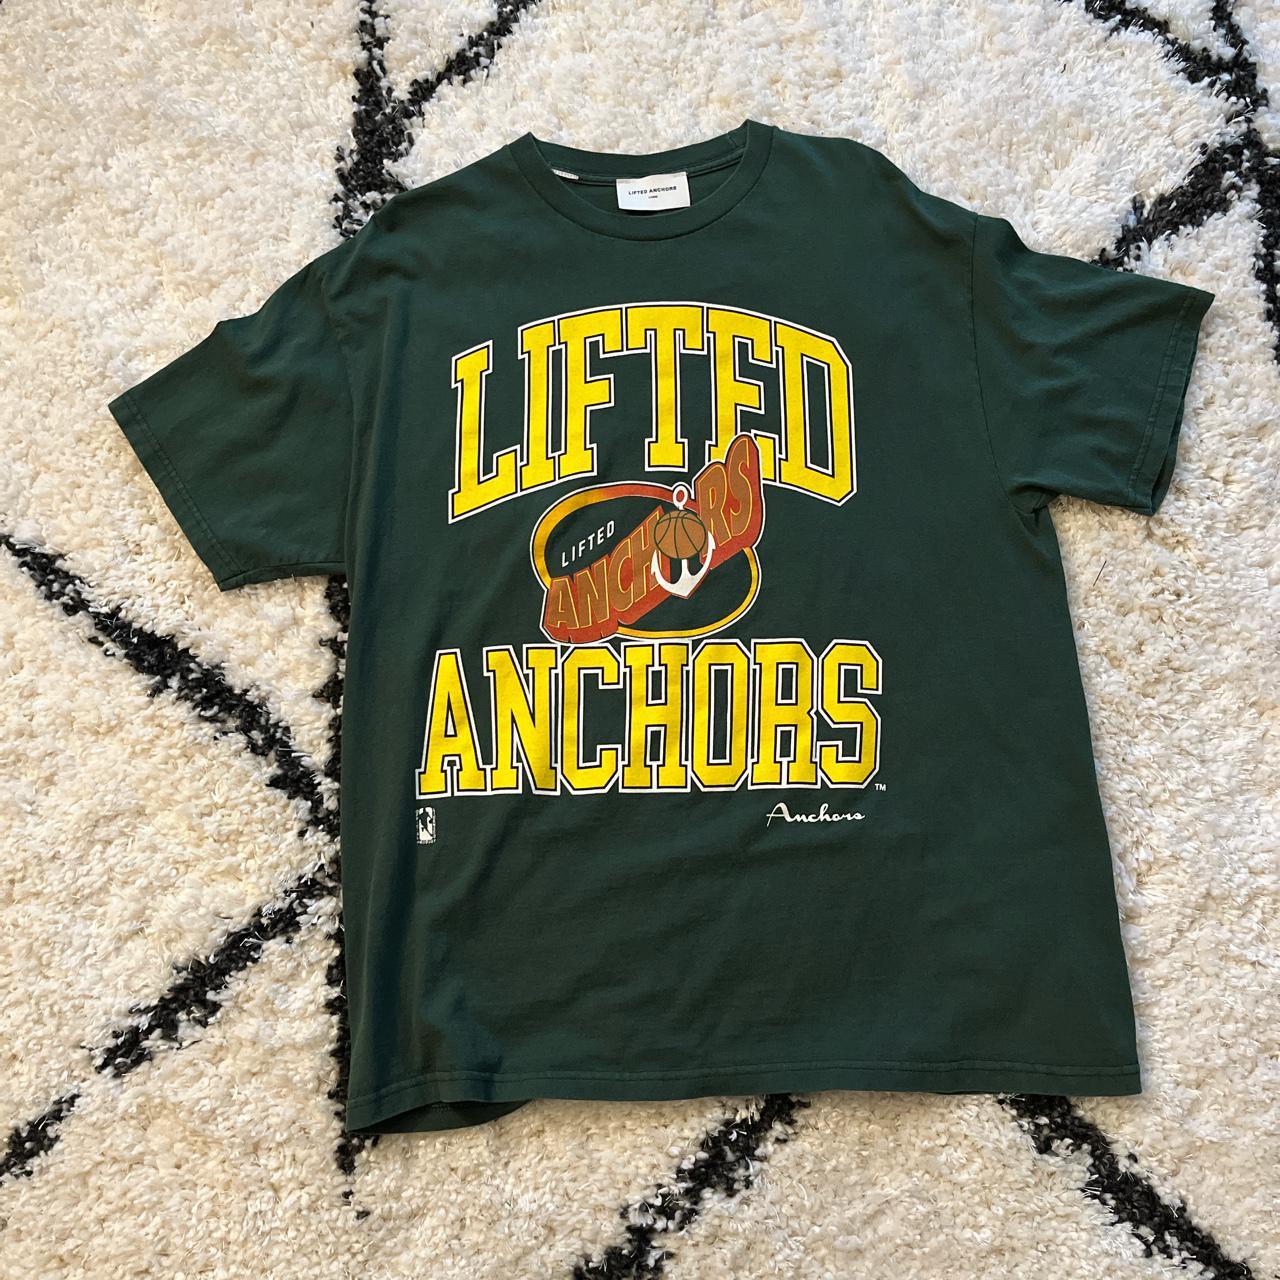 Lifted Anchors Men's Yellow and Green T-shirt